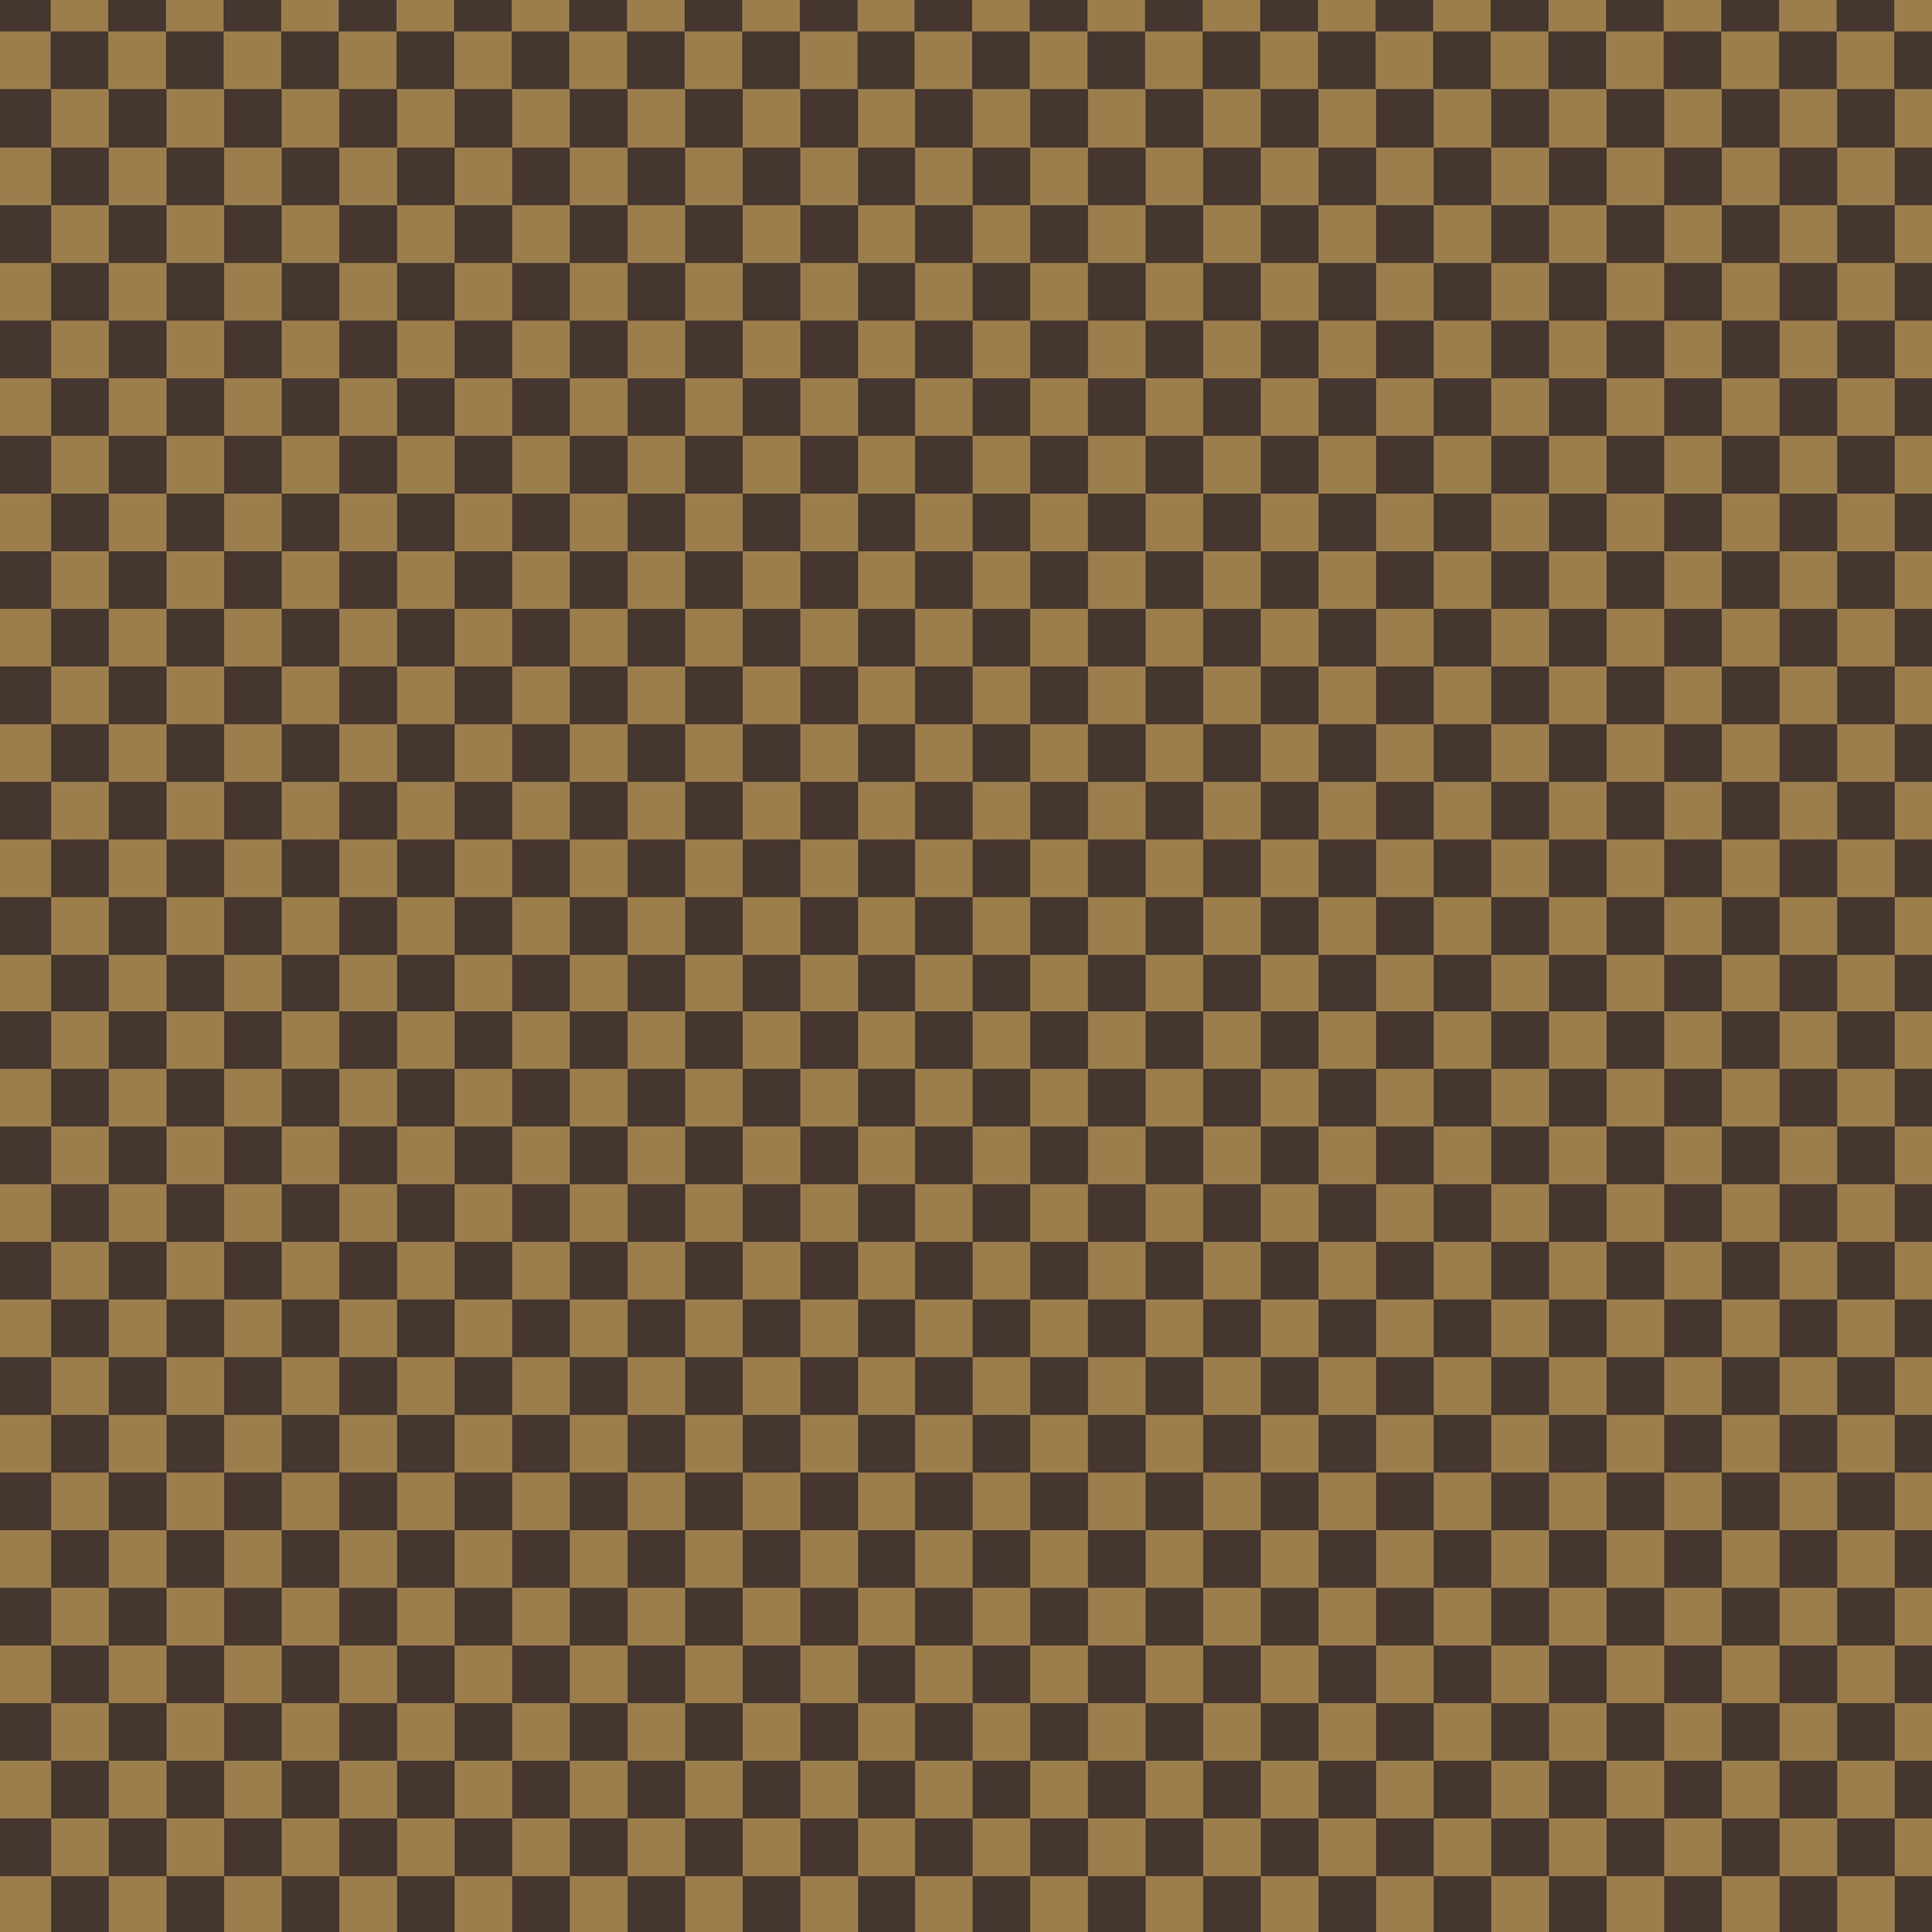 12 x 12 Checkered Brown Designer Decal Pattern Sheet Waterproof - Gl –  The HTV Store